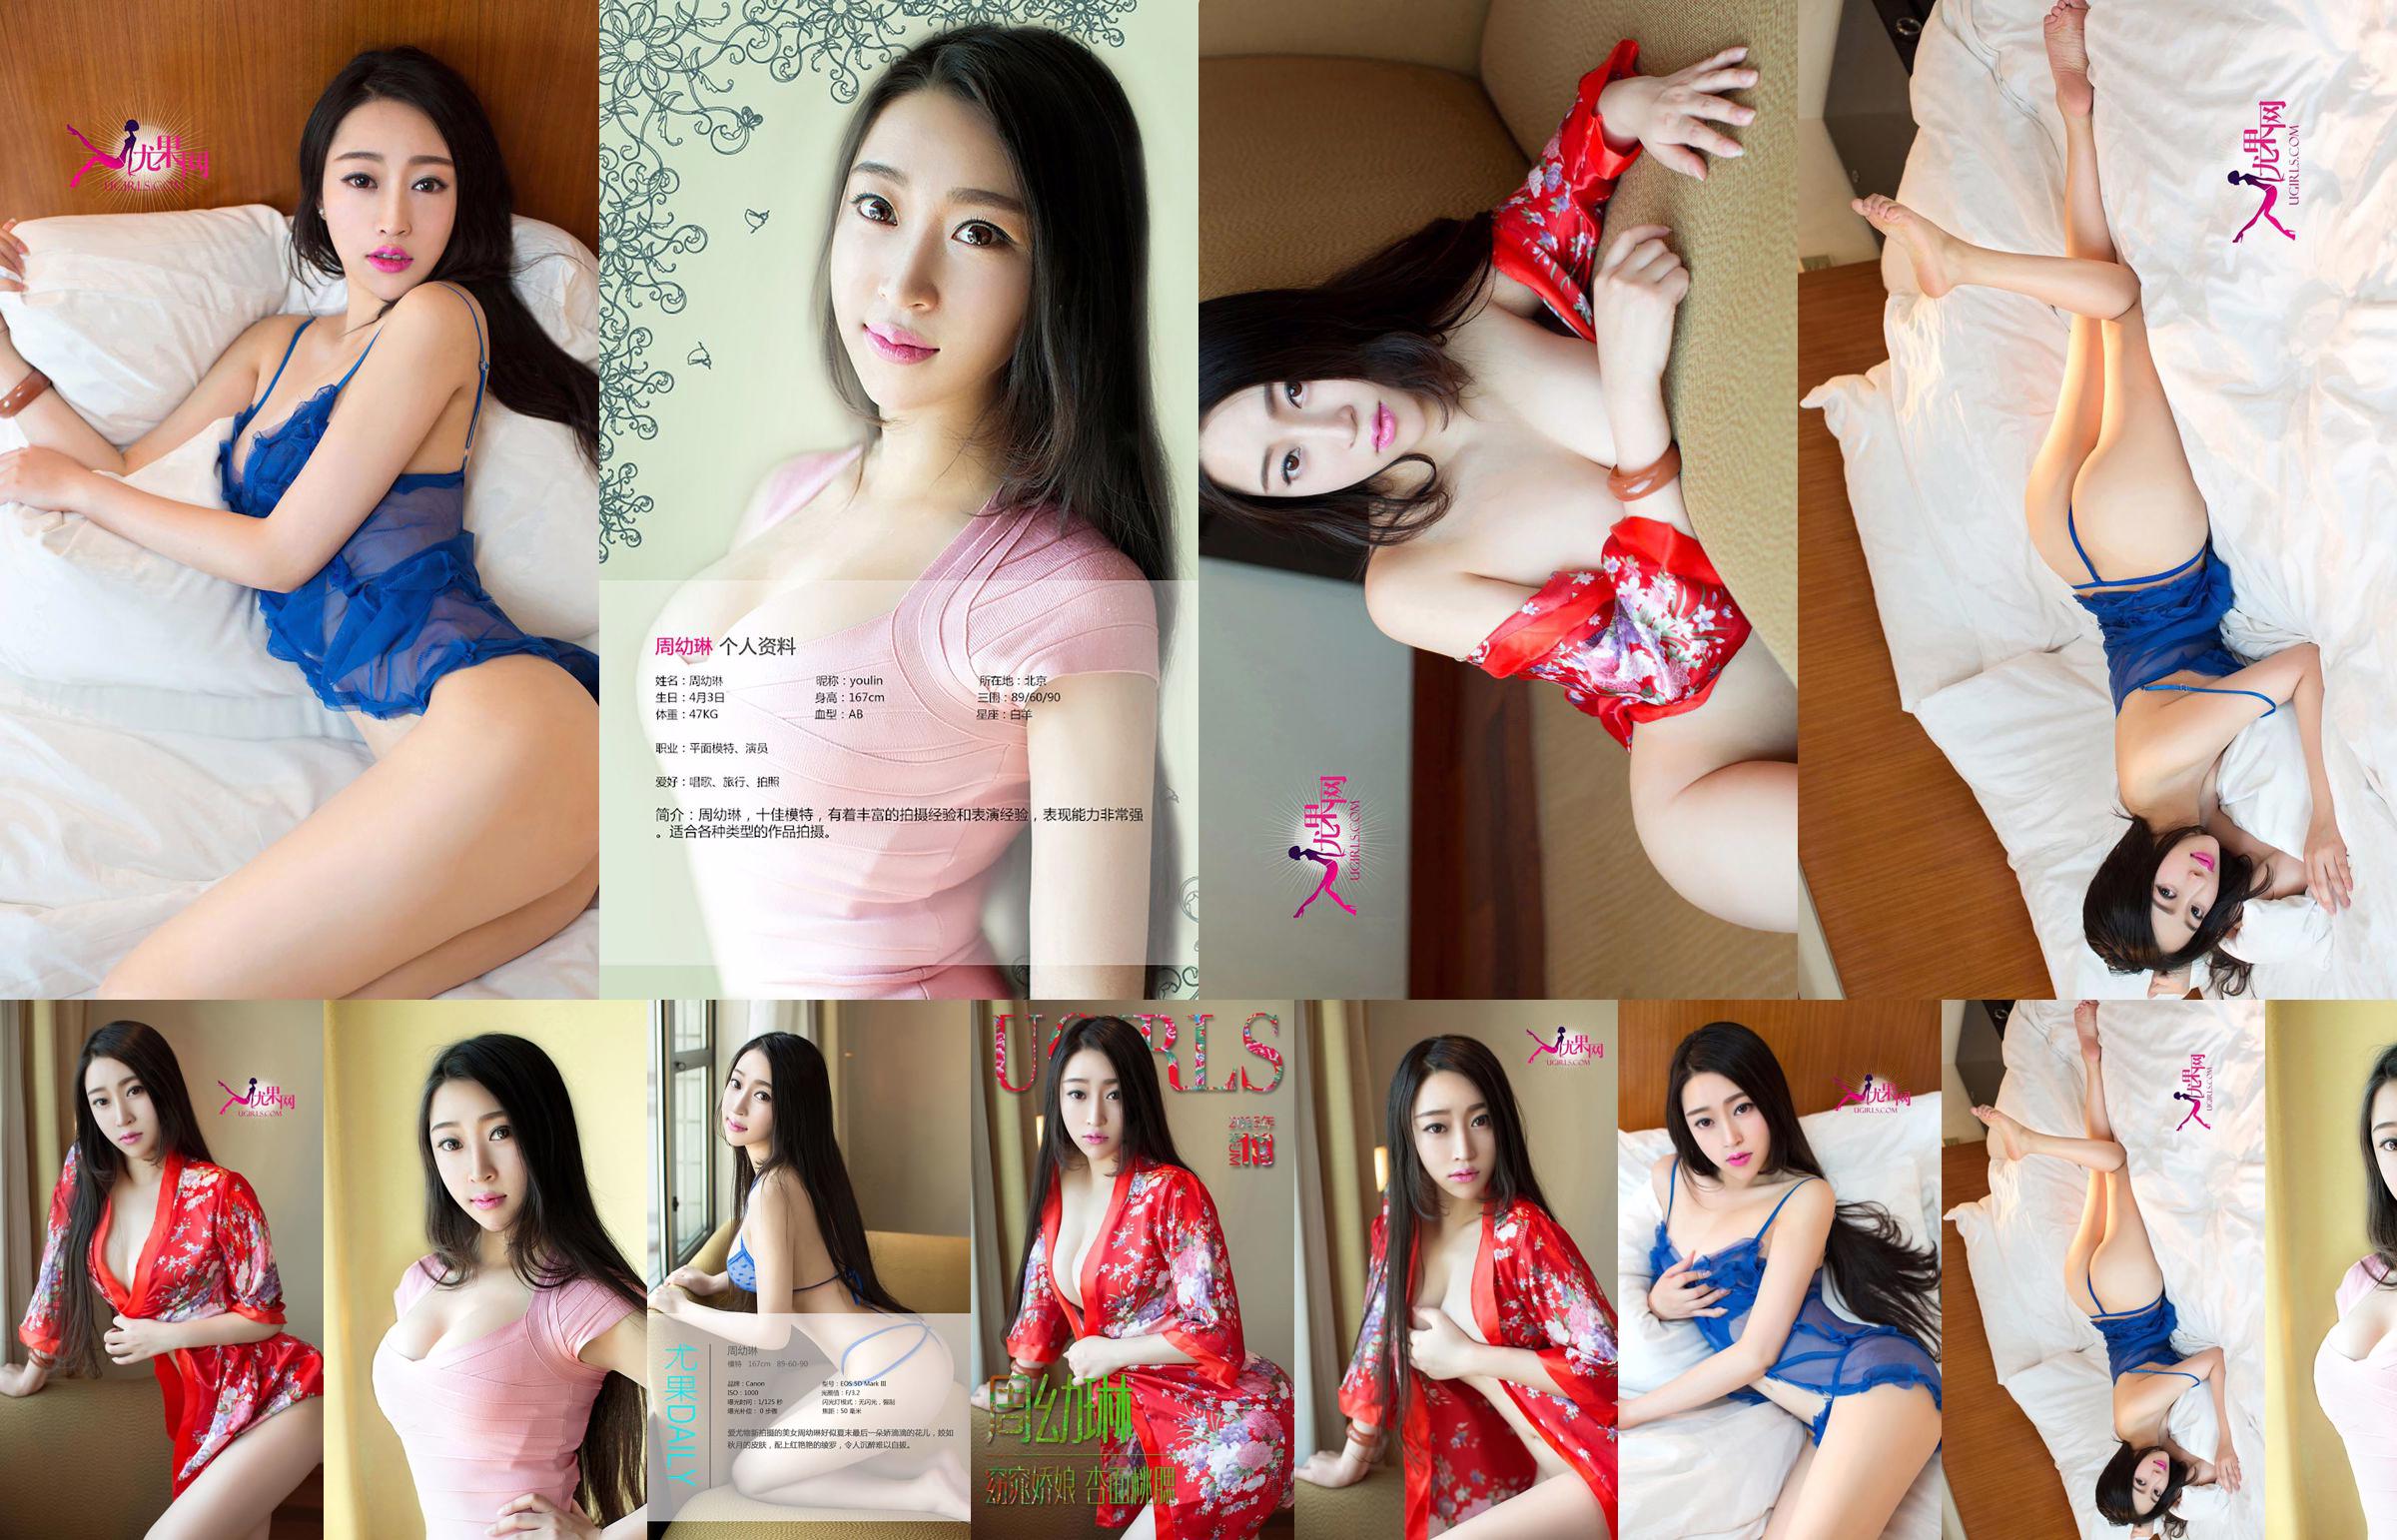 Zhou Youlin "A Beautiful Girl with Apricot Face and Peach Cheeks" [Love Youwu Ugirls] No.113 No.e9d95f Page 8